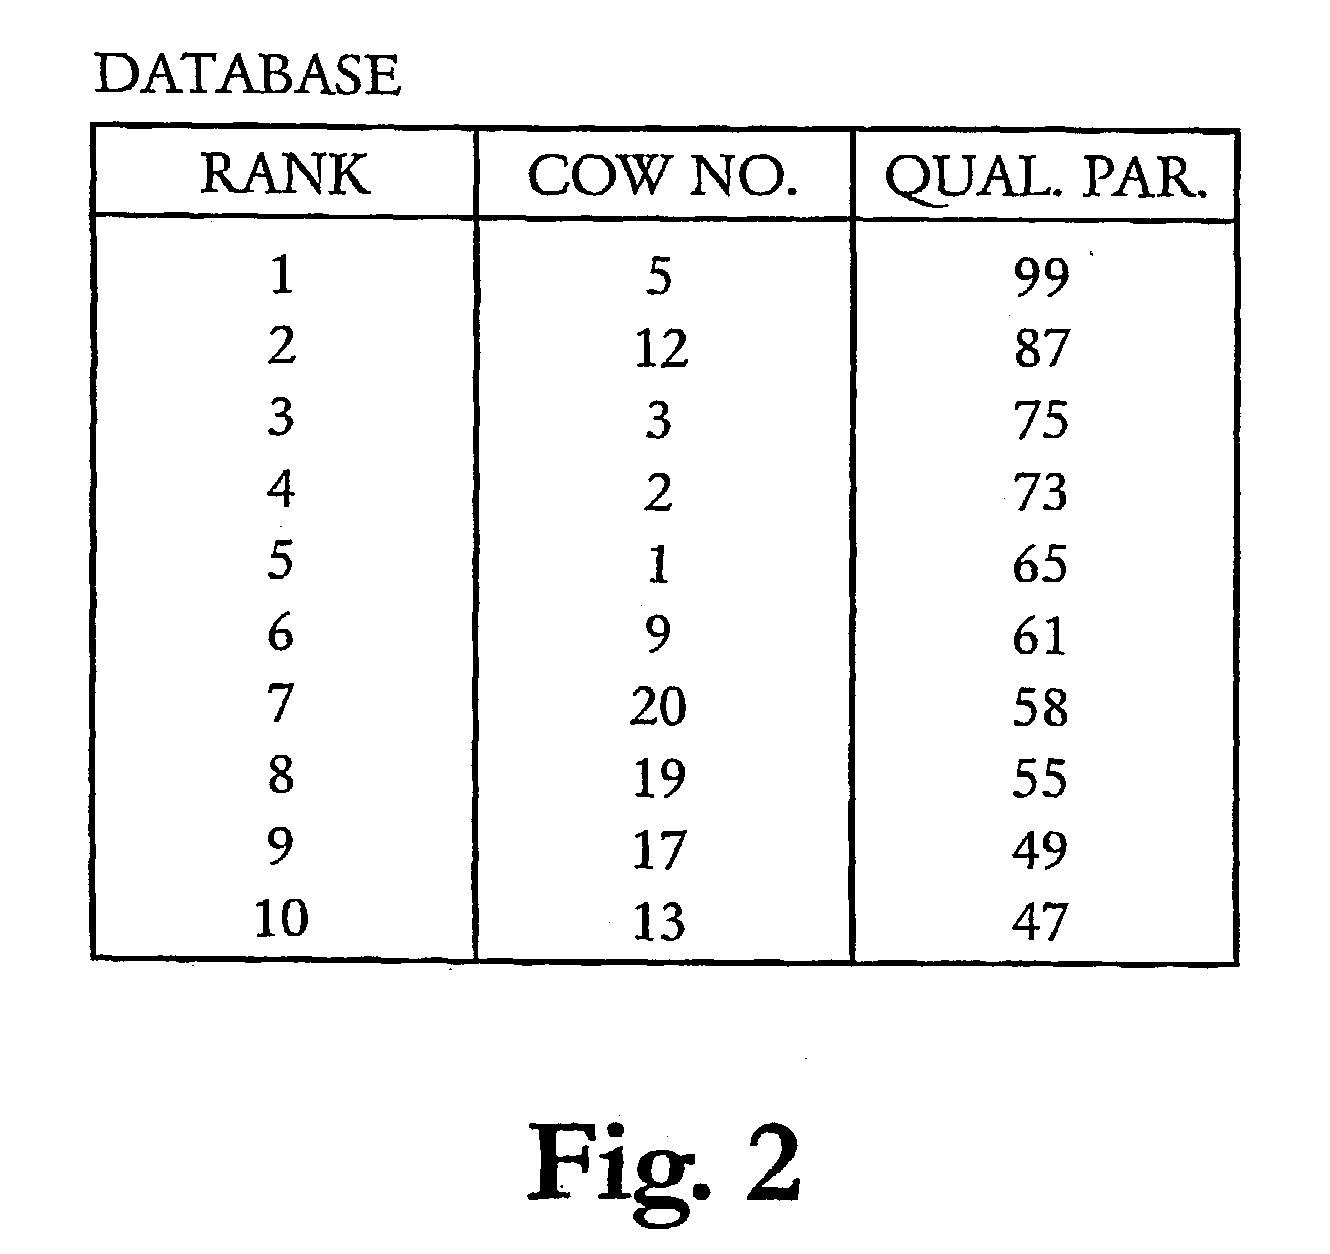 Method of miling and milking parlor